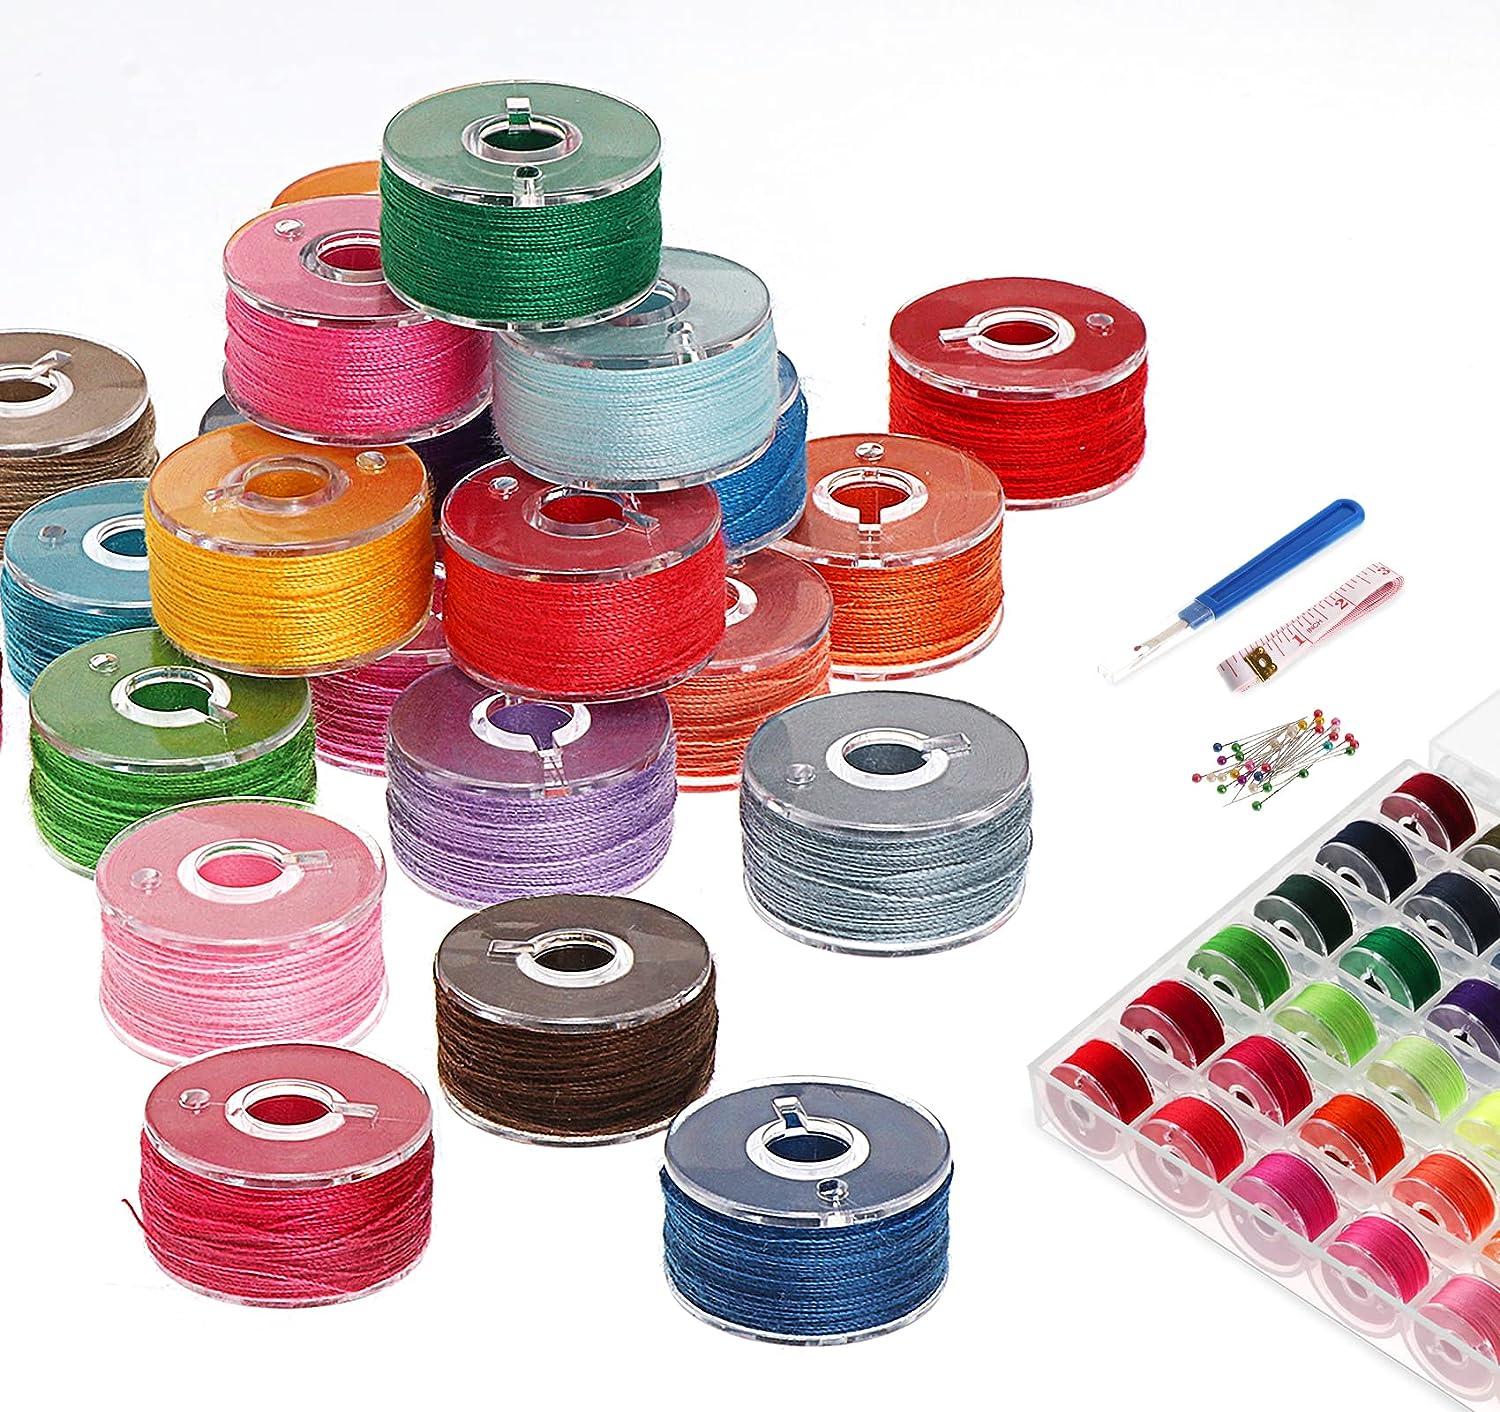 36pcs Transparent Bobbin With Box Of Sewing And Embroidery Bobbins For  Sewing Machines Sewing Accessories